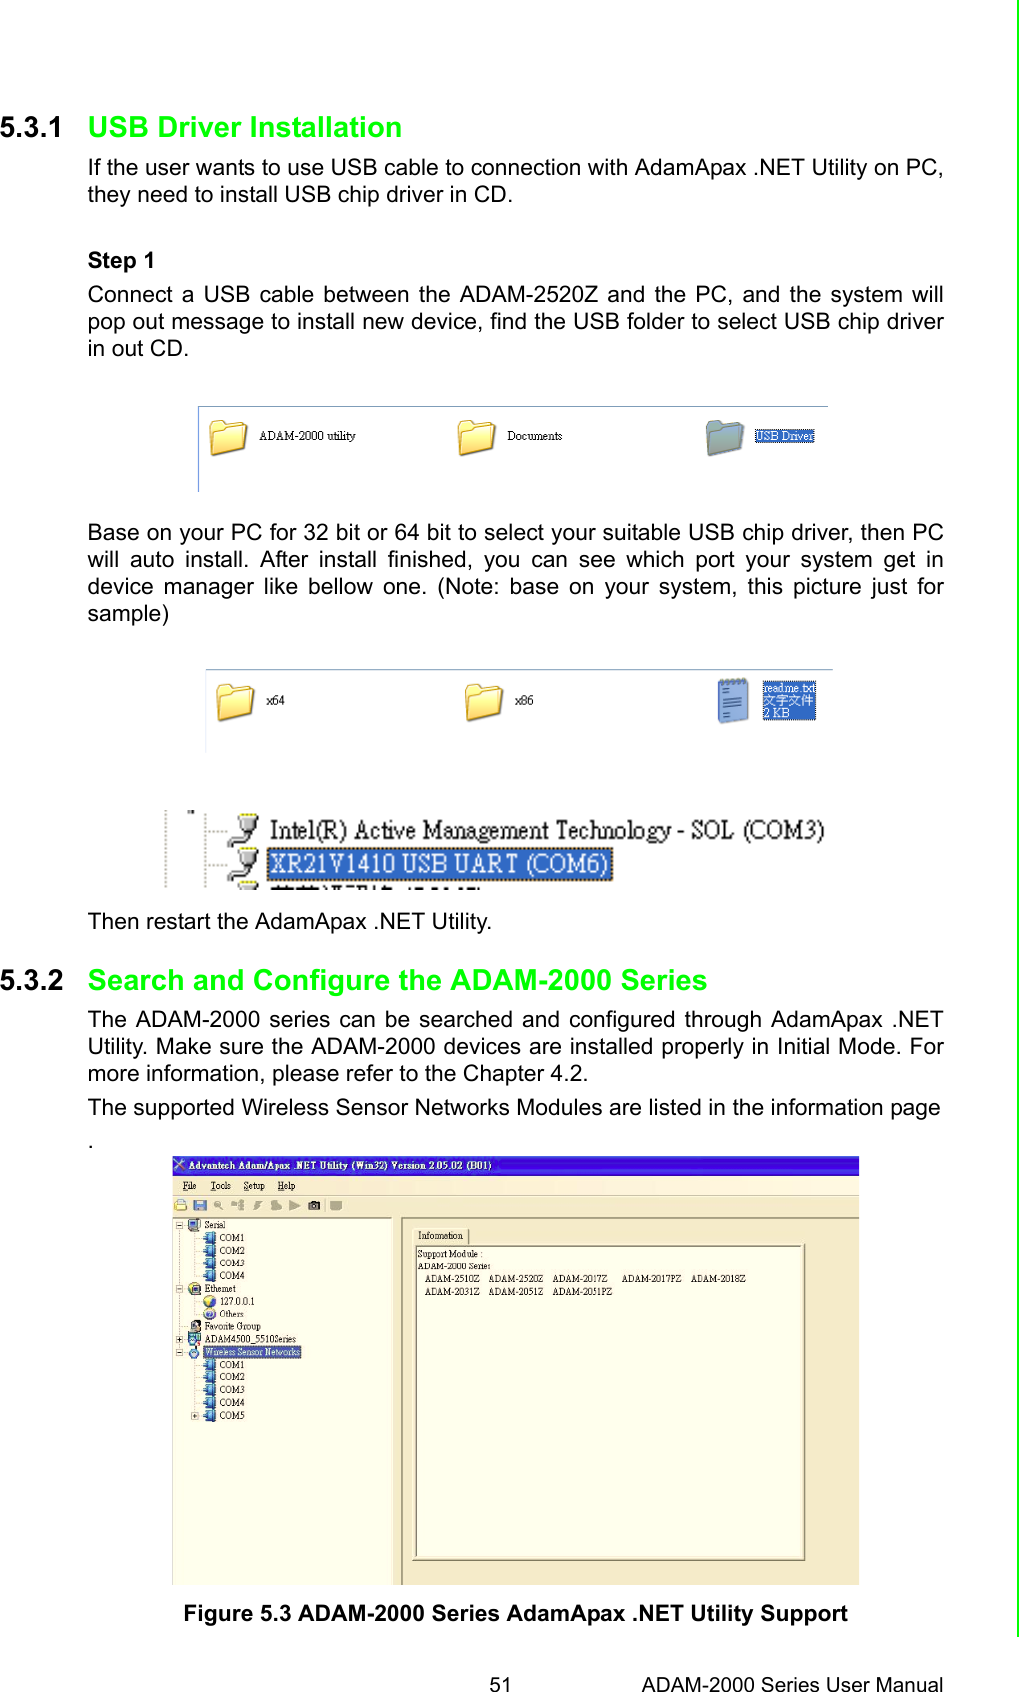 51 ADAM-2000 Series User ManualChapter 5 Software Configuration Guide5.3.1 USB Driver InstallationIf the user wants to use USB cable to connection with AdamApax .NET Utility on PC,they need to install USB chip driver in CD. Step 1Connect a USB cable between the ADAM-2520Z and the PC, and the system willpop out message to install new device, find the USB folder to select USB chip driverin out CD. Base on your PC for 32 bit or 64 bit to select your suitable USB chip driver, then PCwill auto install. After install finished, you can see which port your system get indevice manager like bellow one. (Note: base on your system, this picture just forsample)    Then restart the AdamApax .NET Utility.5.3.2 Search and Configure the ADAM-2000 SeriesThe ADAM-2000 series can be searched and configured through AdamApax .NETUtility. Make sure the ADAM-2000 devices are installed properly in Initial Mode. Formore information, please refer to the Chapter 4.2.The supported Wireless Sensor Networks Modules are listed in the information page.Figure 5.3 ADAM-2000 Series AdamApax .NET Utility Support